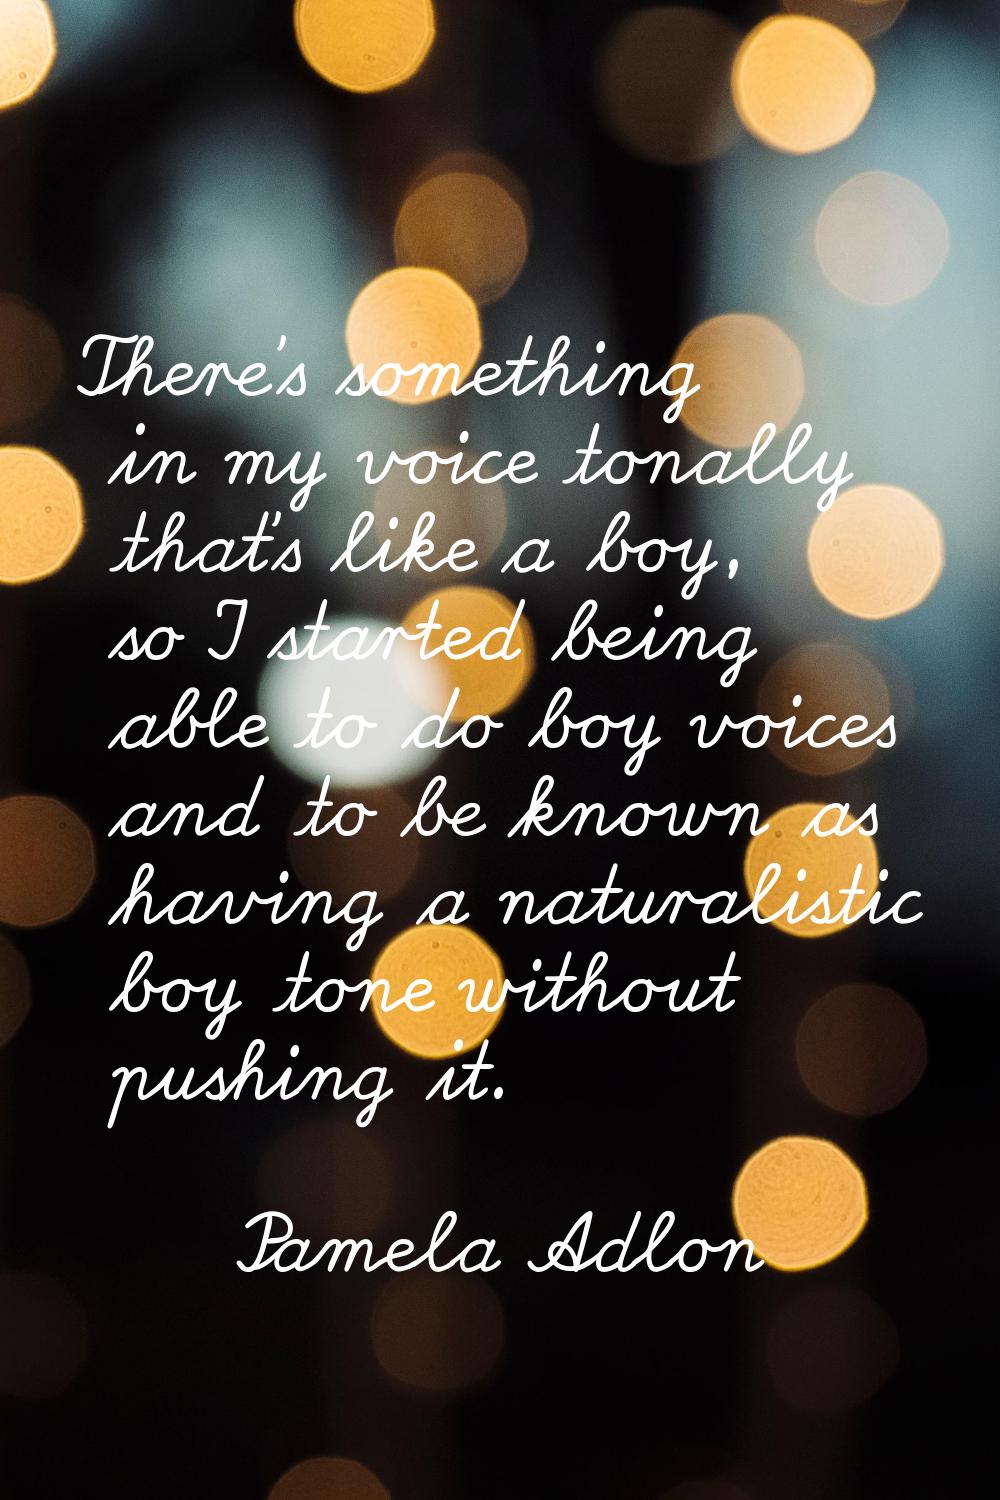 There's something in my voice tonally that's like a boy, so I started being able to do boy voices a